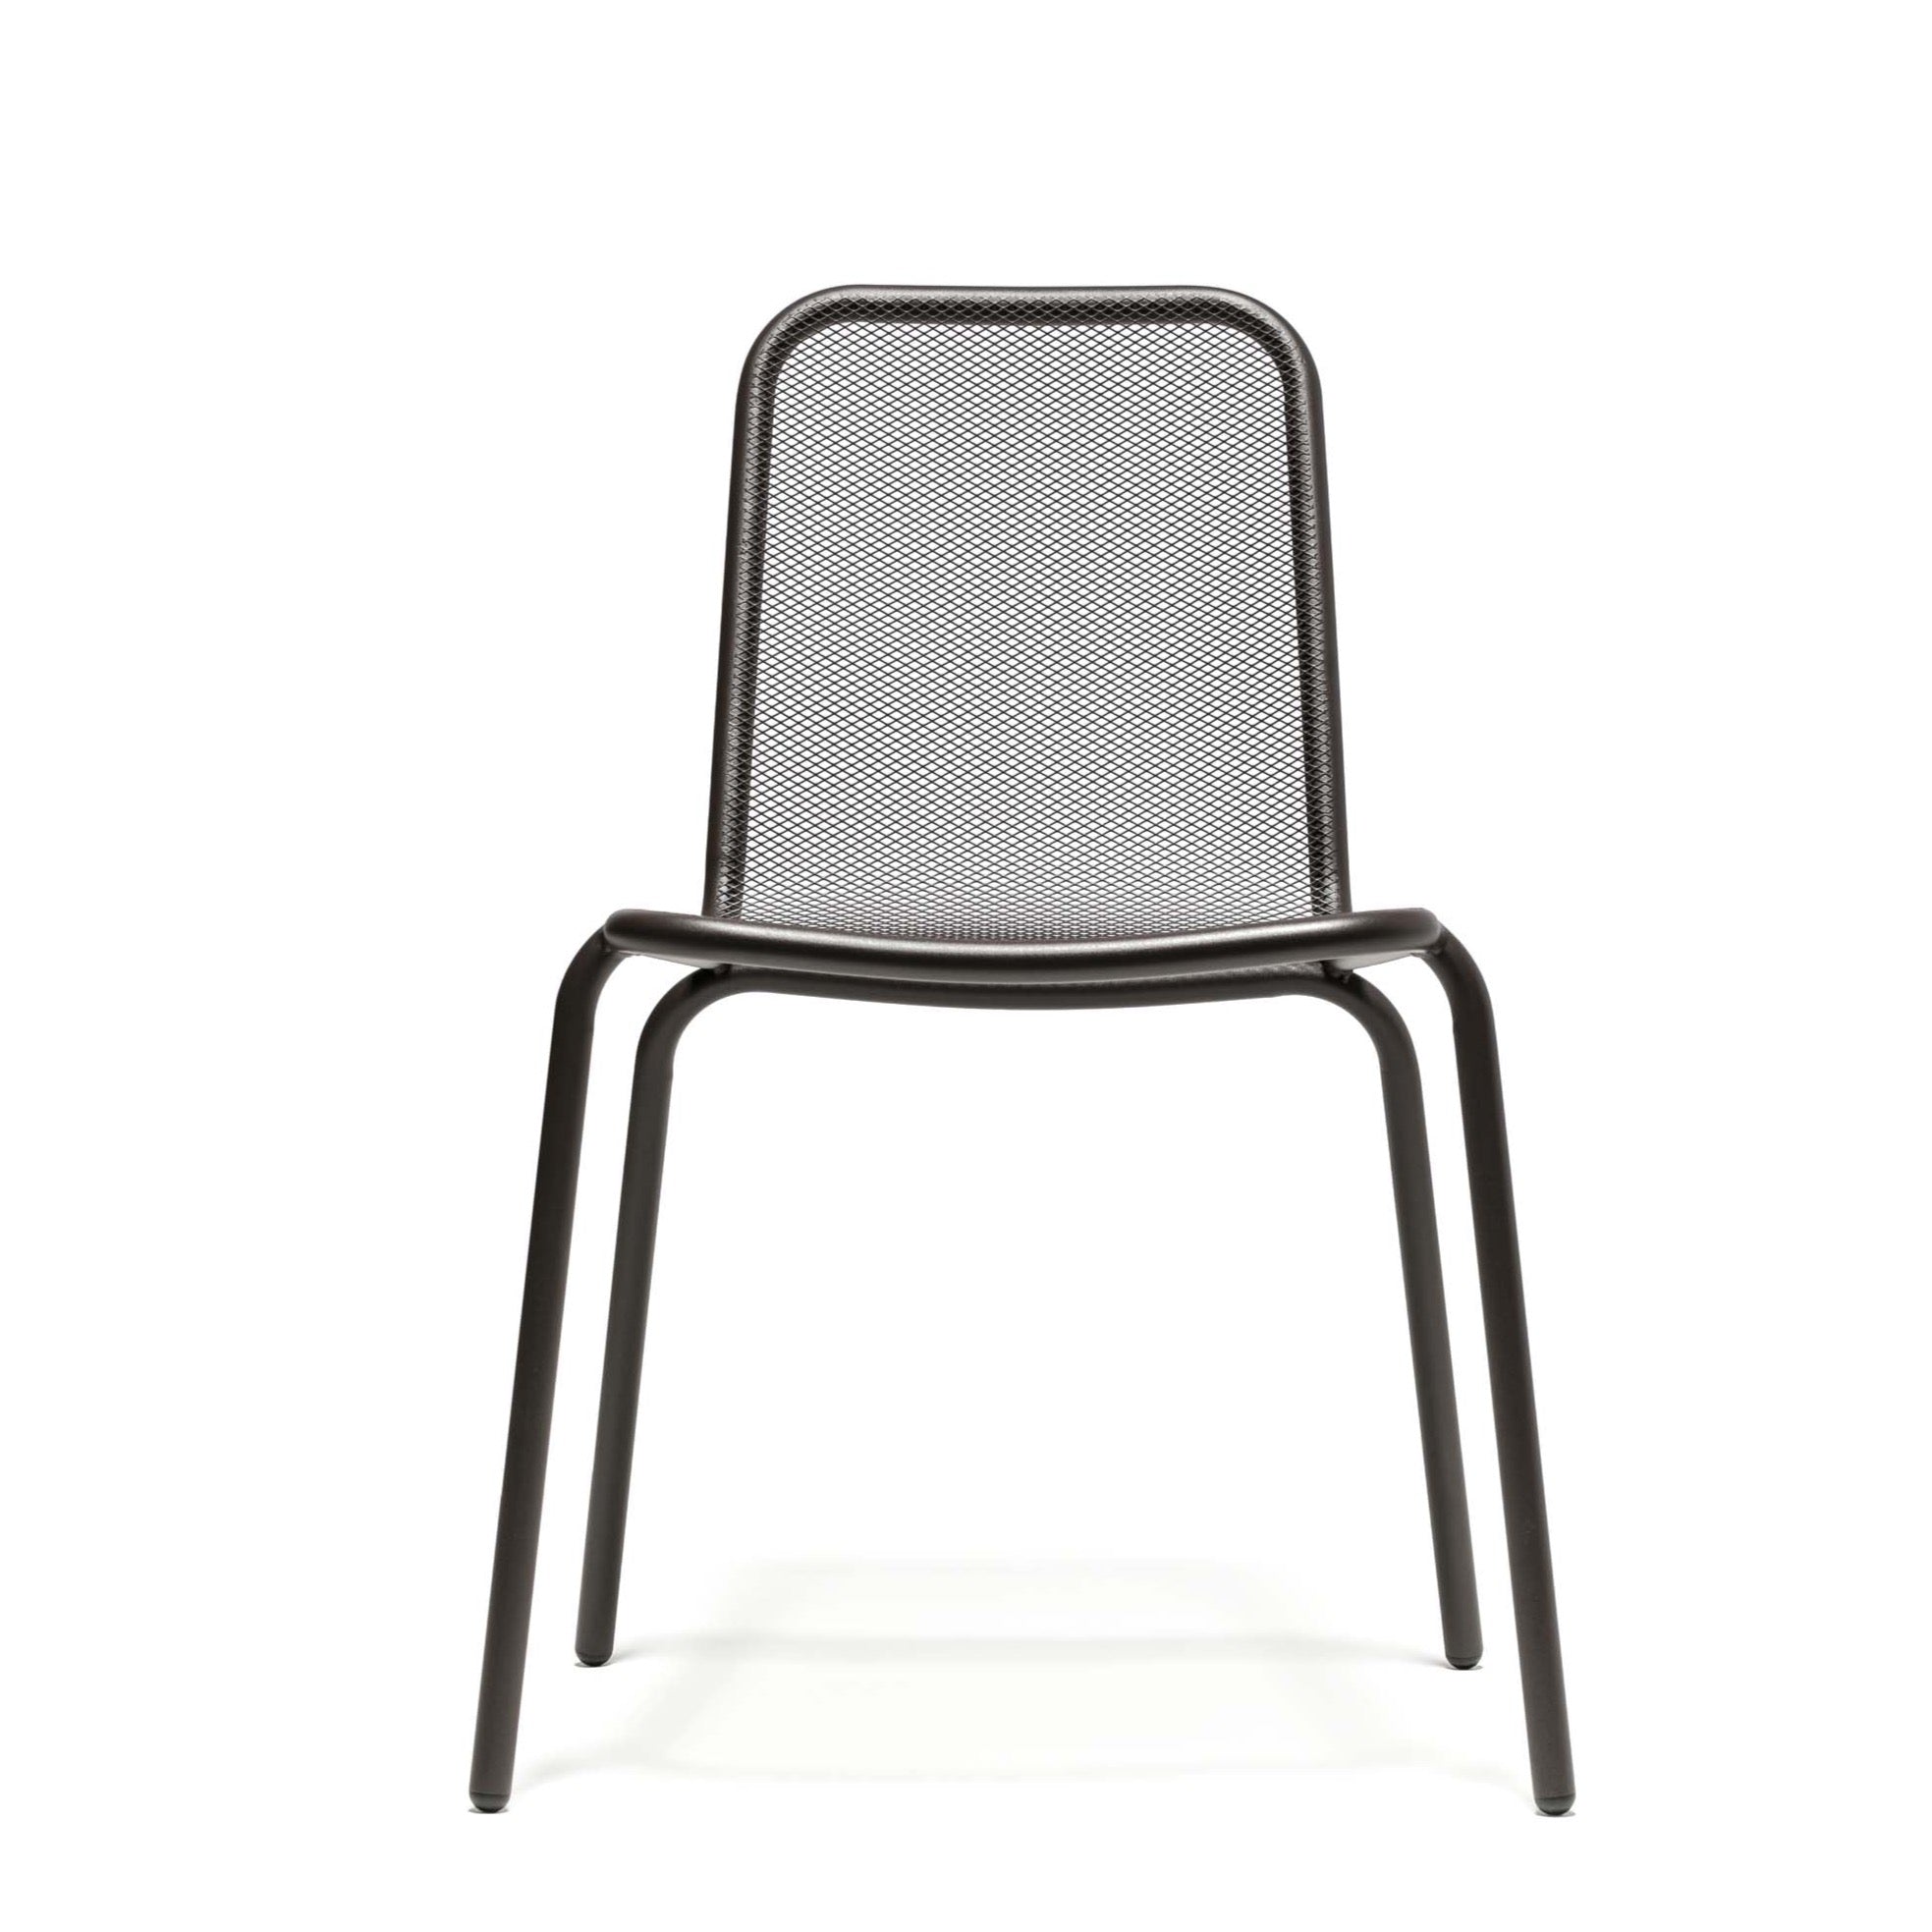 Todus Starling dining chair